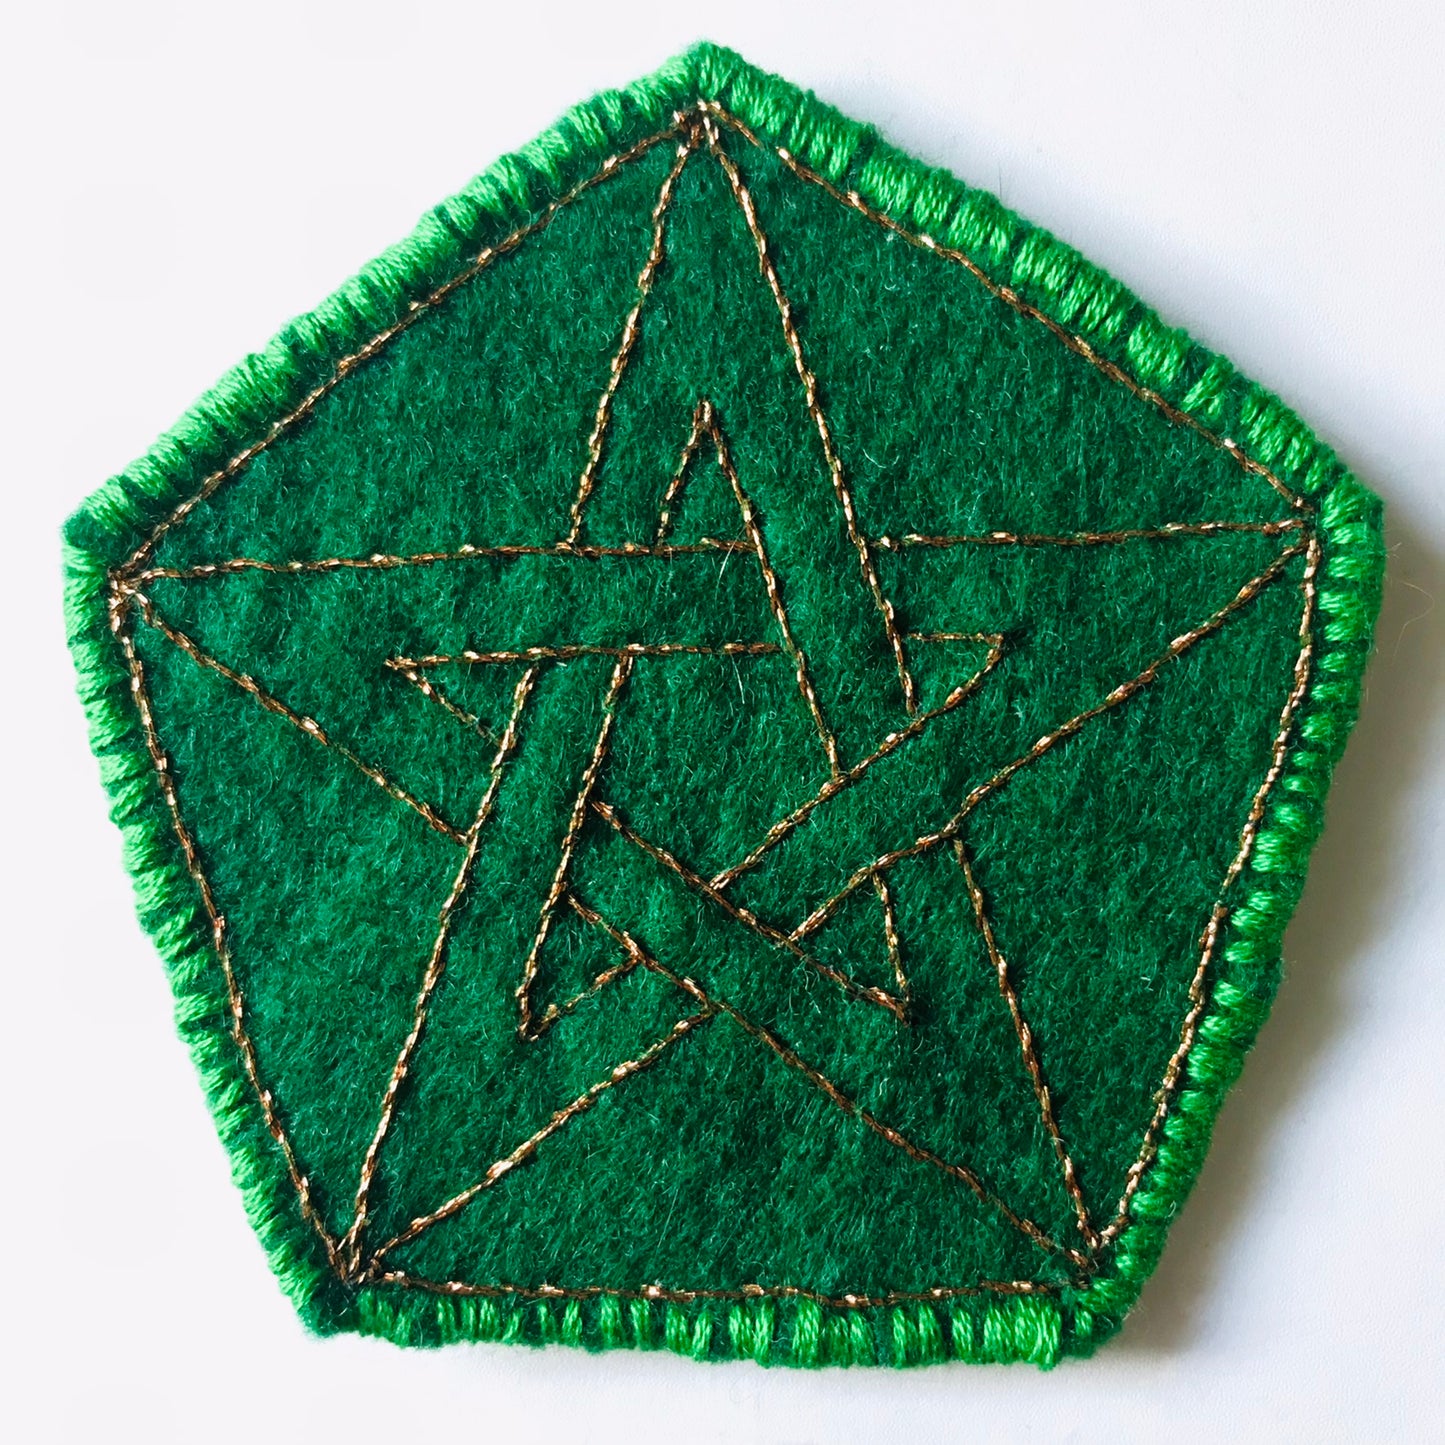 PENTACLE, GREEN FELT & COPPER METAL THREAD EMBROIDERED PROTECTION PATCHES, MINI TRAVEL CRYSTAL CHARGERS, ALTER PIECES